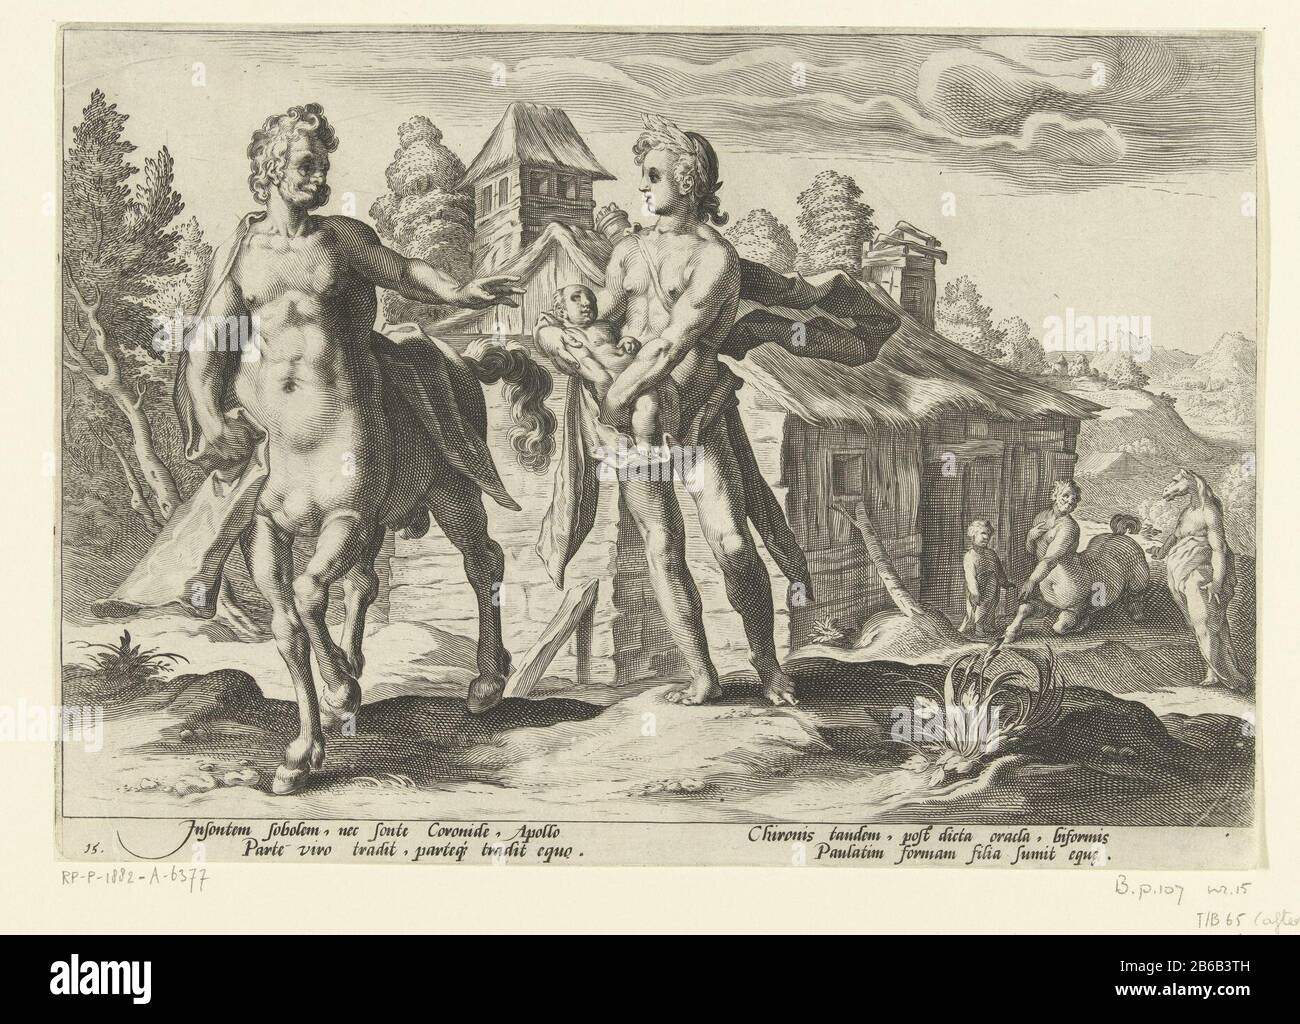 Apollo relies Asclepius to Chiron Ovid's Metamorphoses (series title) Apollo relies Asclepius to Chiro Ovid's Metamorphoses (series title) Property Type: print Serial Number 15 / 20Objectnummer: RP-P-1882-A-6377Catalogusreferentie: The Illustrated Bartsch 65-afterHollstein Dutch 542-afterNew Hollstein Dutch 566 -1 (2) Description: Apollo gives his child Asclepius, he of Coronis' abdomen is cut after he shot her, the centaur Chiron. In the background you can see how the daughter of Chiron turns into a horse, after ha predicted the future of Asclepius and her father will be. Among the show twice Stock Photo